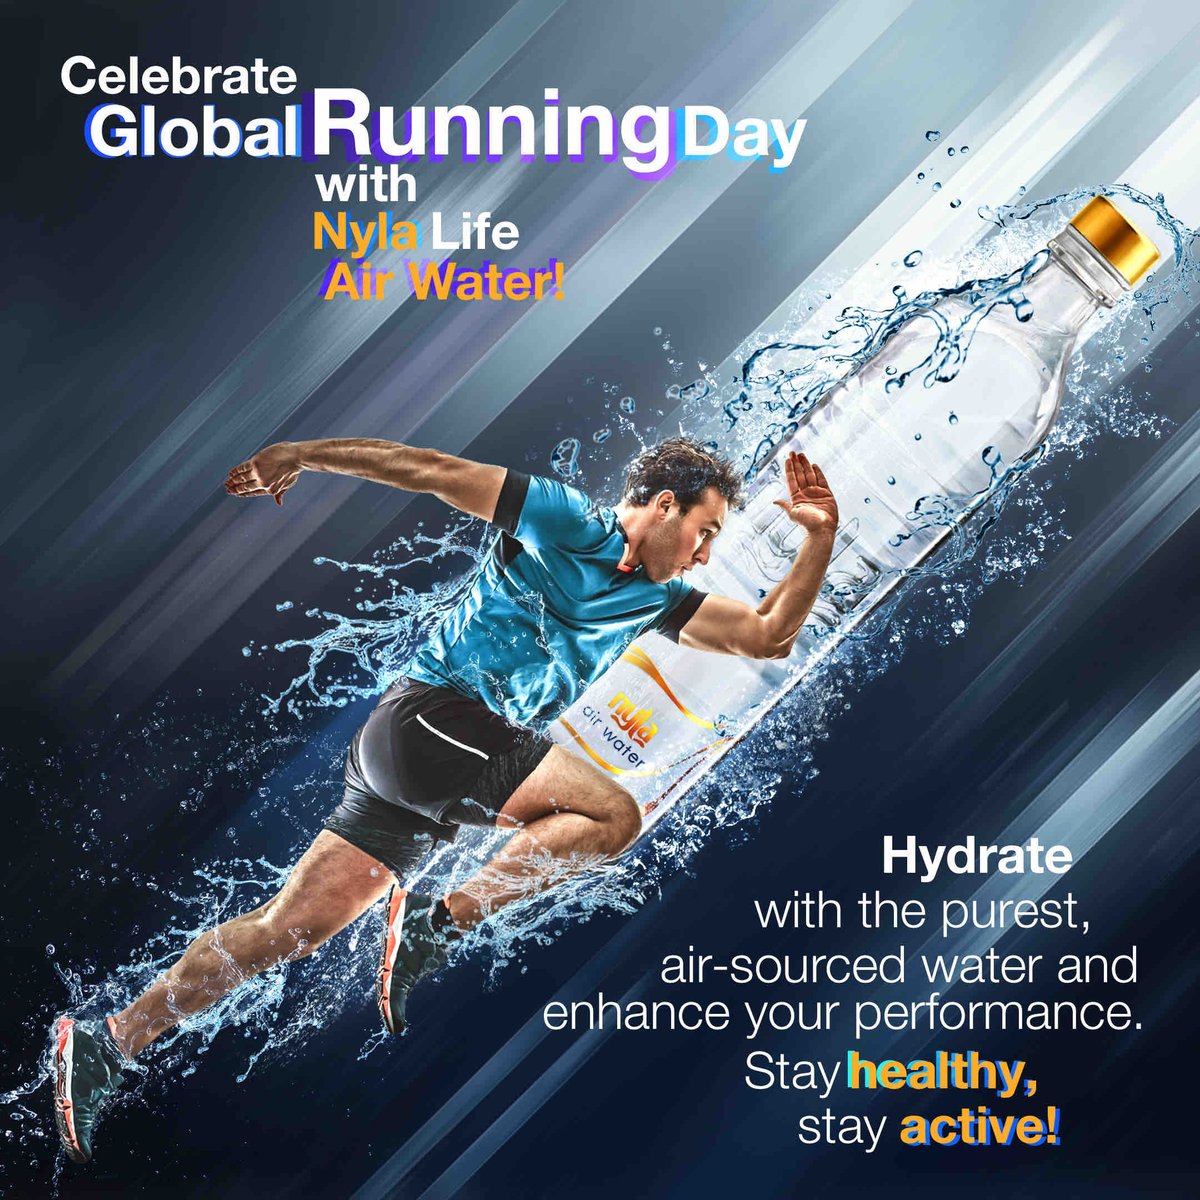 Hydrate your run with the purest water.👉 Discover the purest hydration for your active lifestyle. Celebrate Global Running Day with Nyla Life Air Water! Stay healthy, stay active! #GlobalRunningDay #NylaLife #AirWater #Health #Fitness